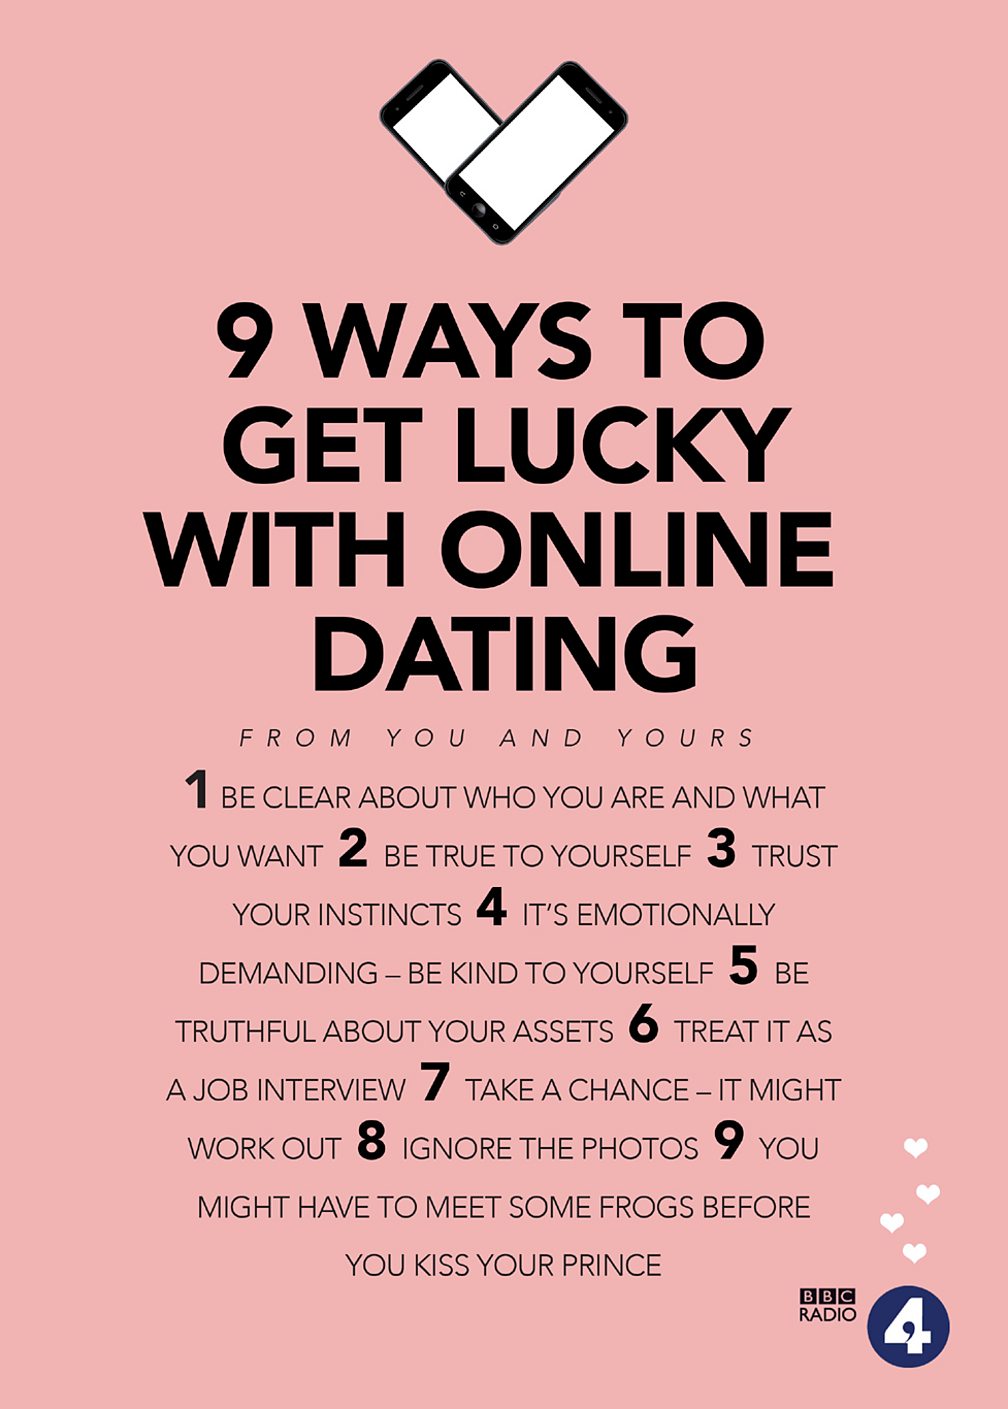 Online dating tips first email